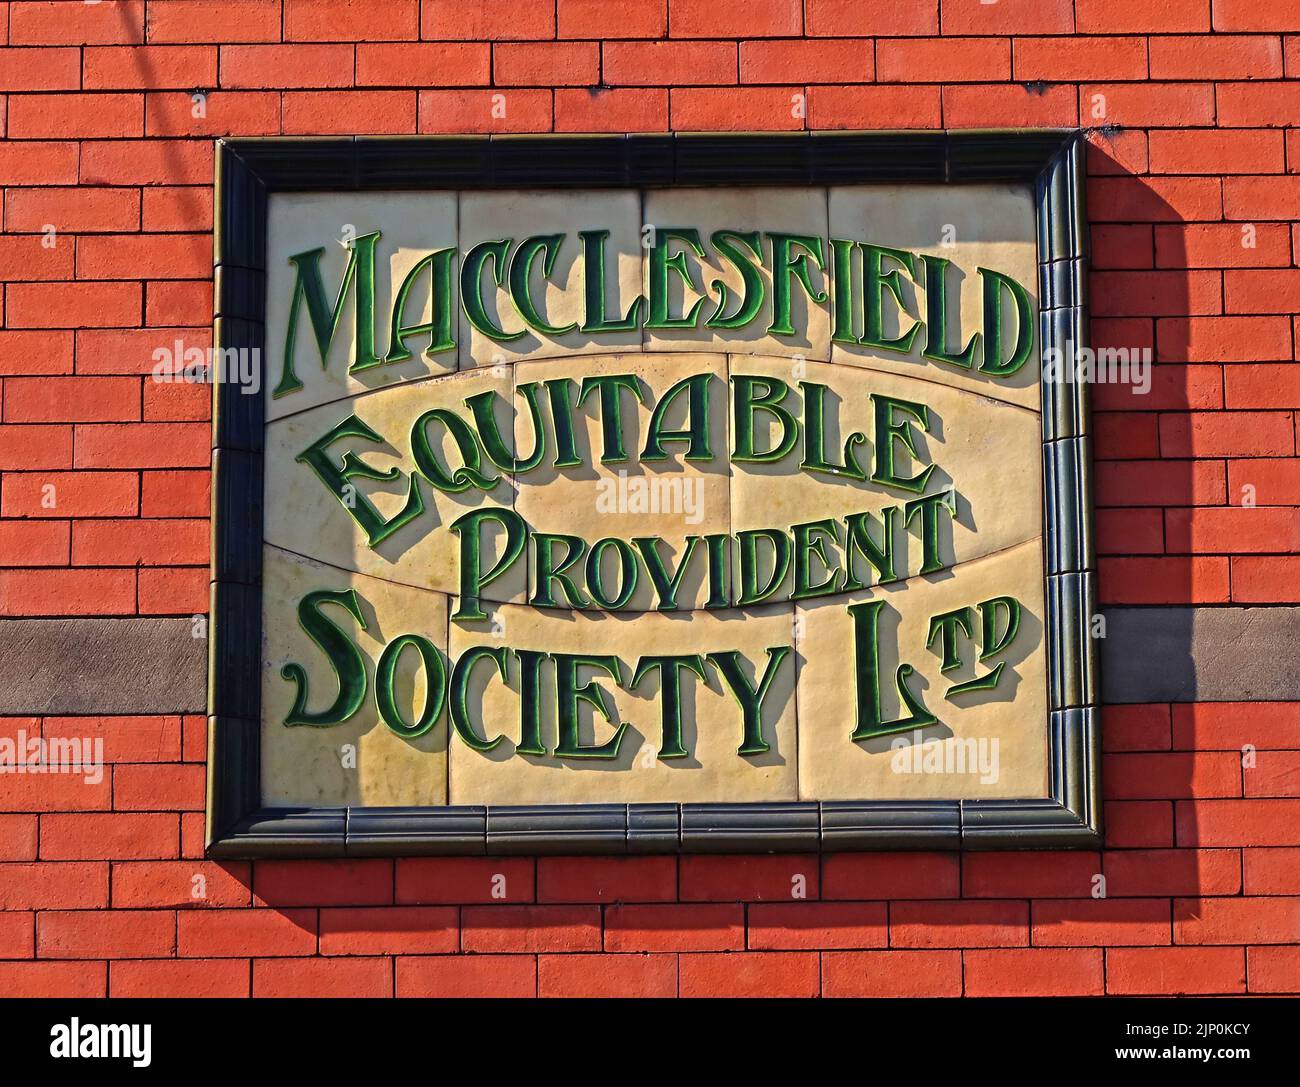 Macclesfield Equitable Provident Society Limited, old tiled signs, 1855, Cheshire, England, UK, SK11 6UD Stock Photo